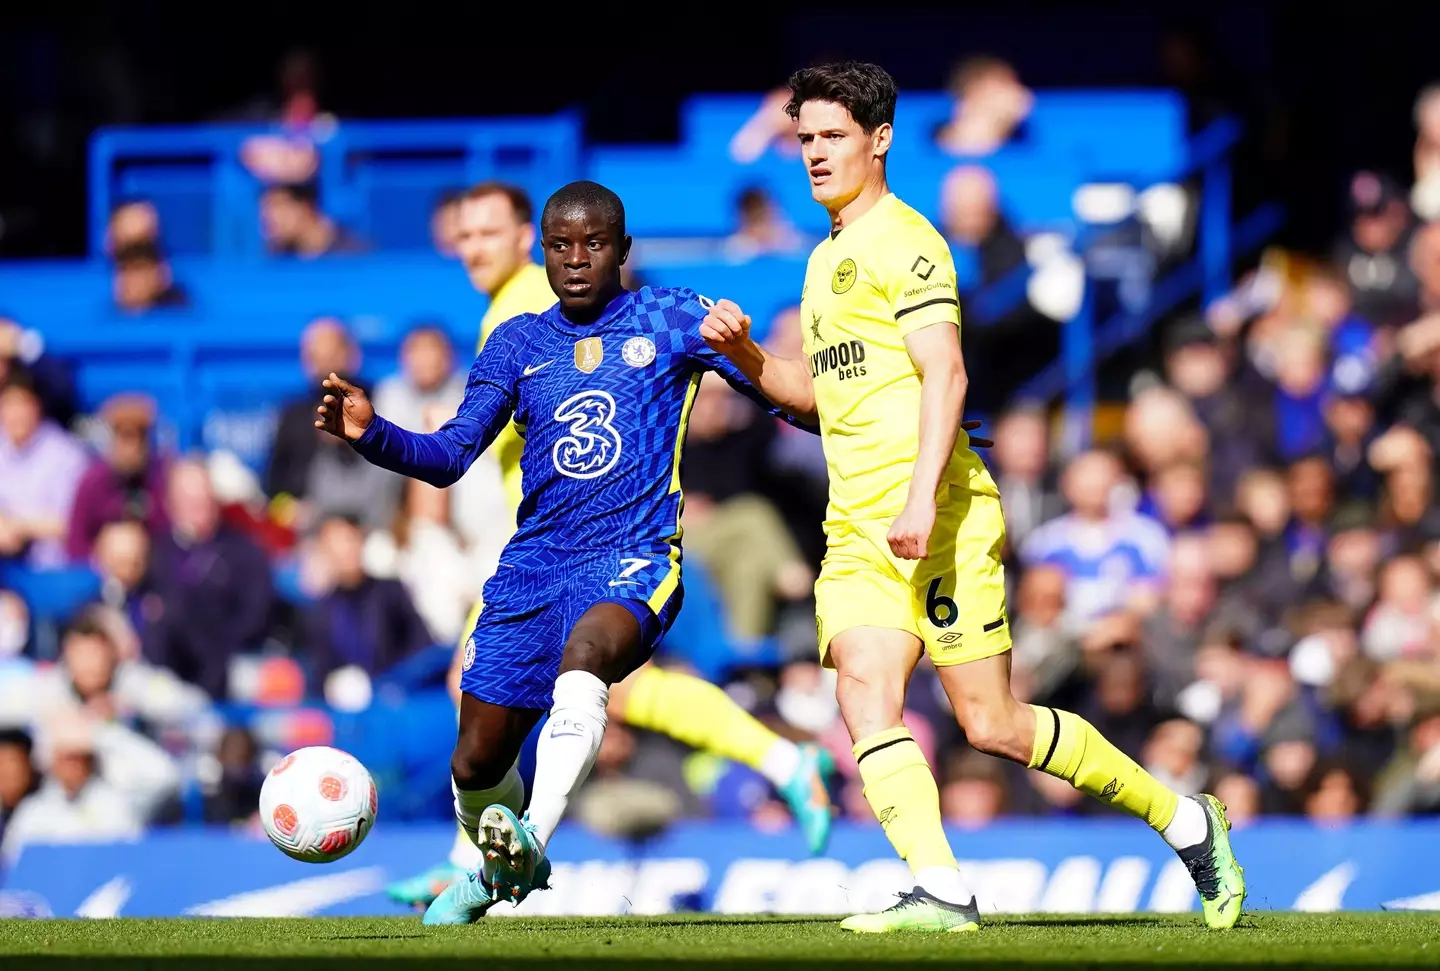 Kante is still everyone's favourite player. Image: PA Images